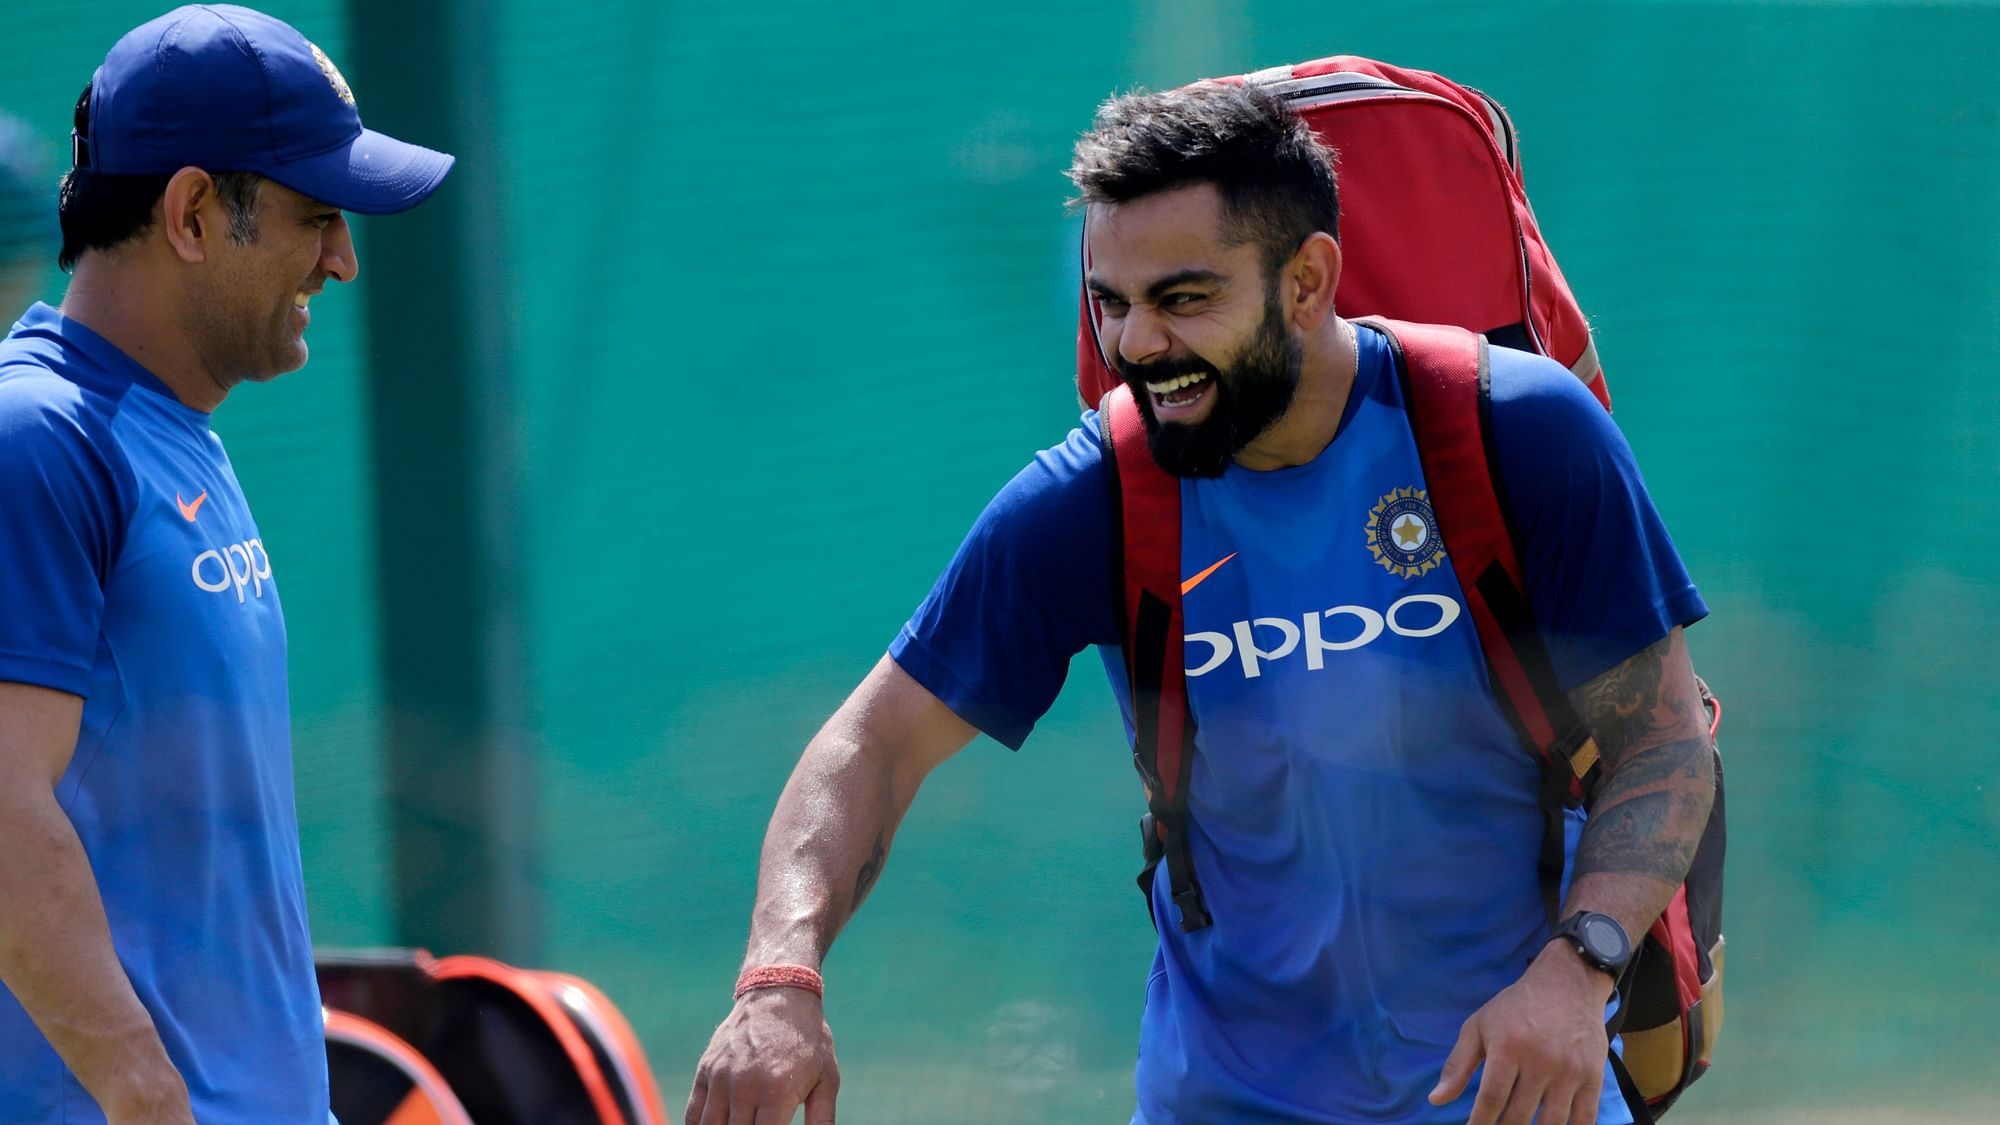 MS Dhoni and Virat Kohli share a laugh in the nets ahead of India’s second ODI against Australia at Nagpur.